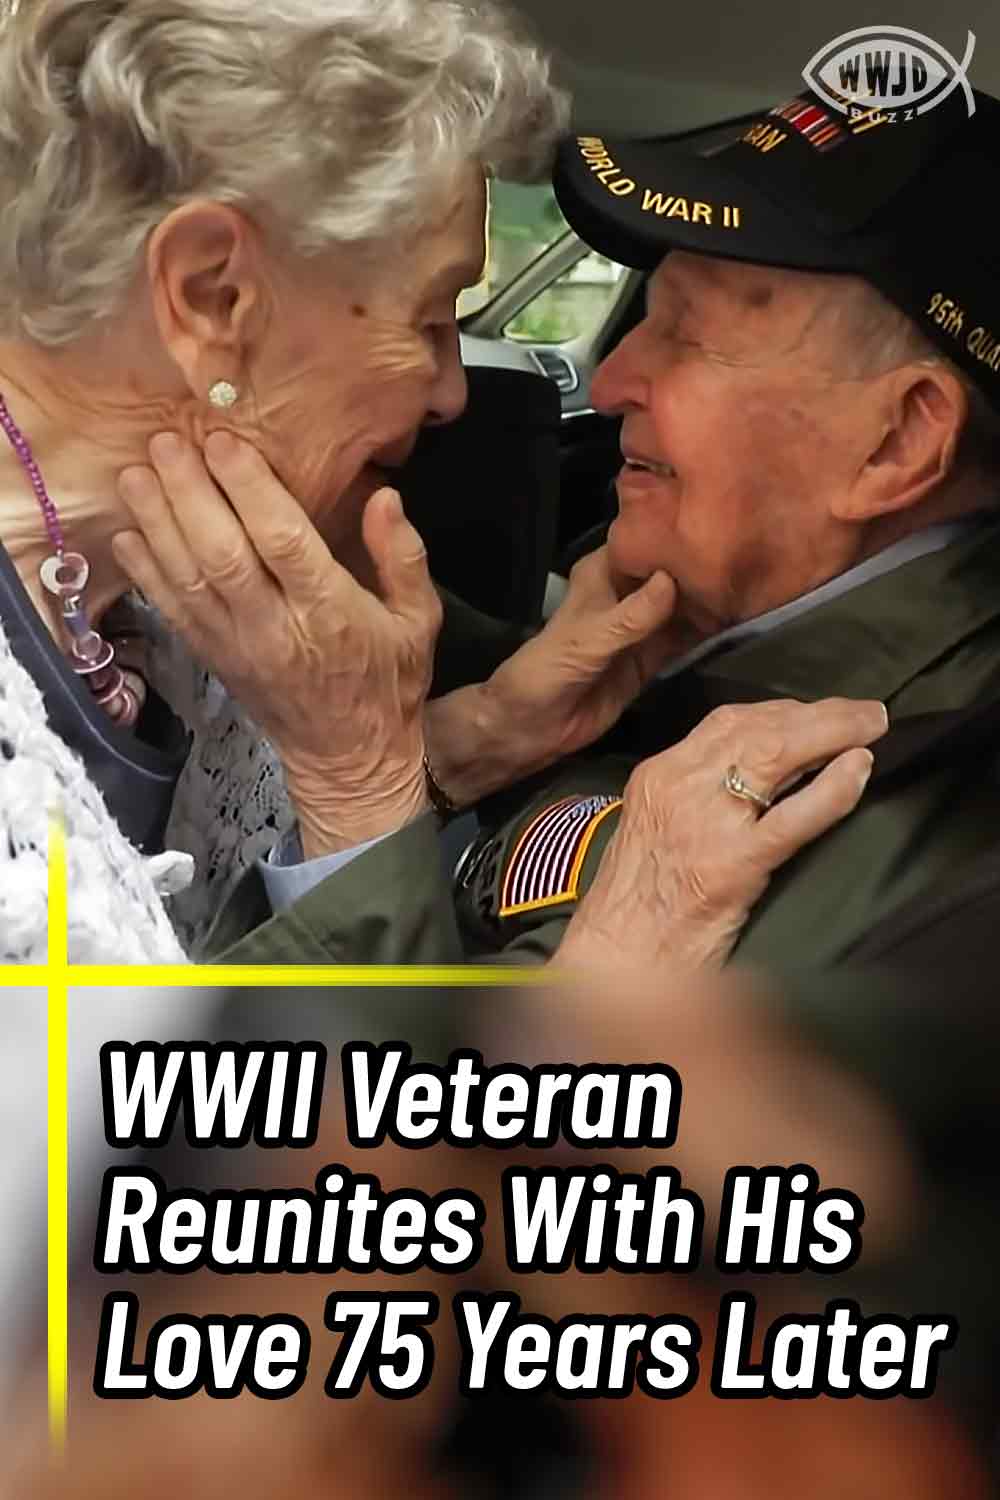 WWII Veteran Reunites With His Love 75 Years Later